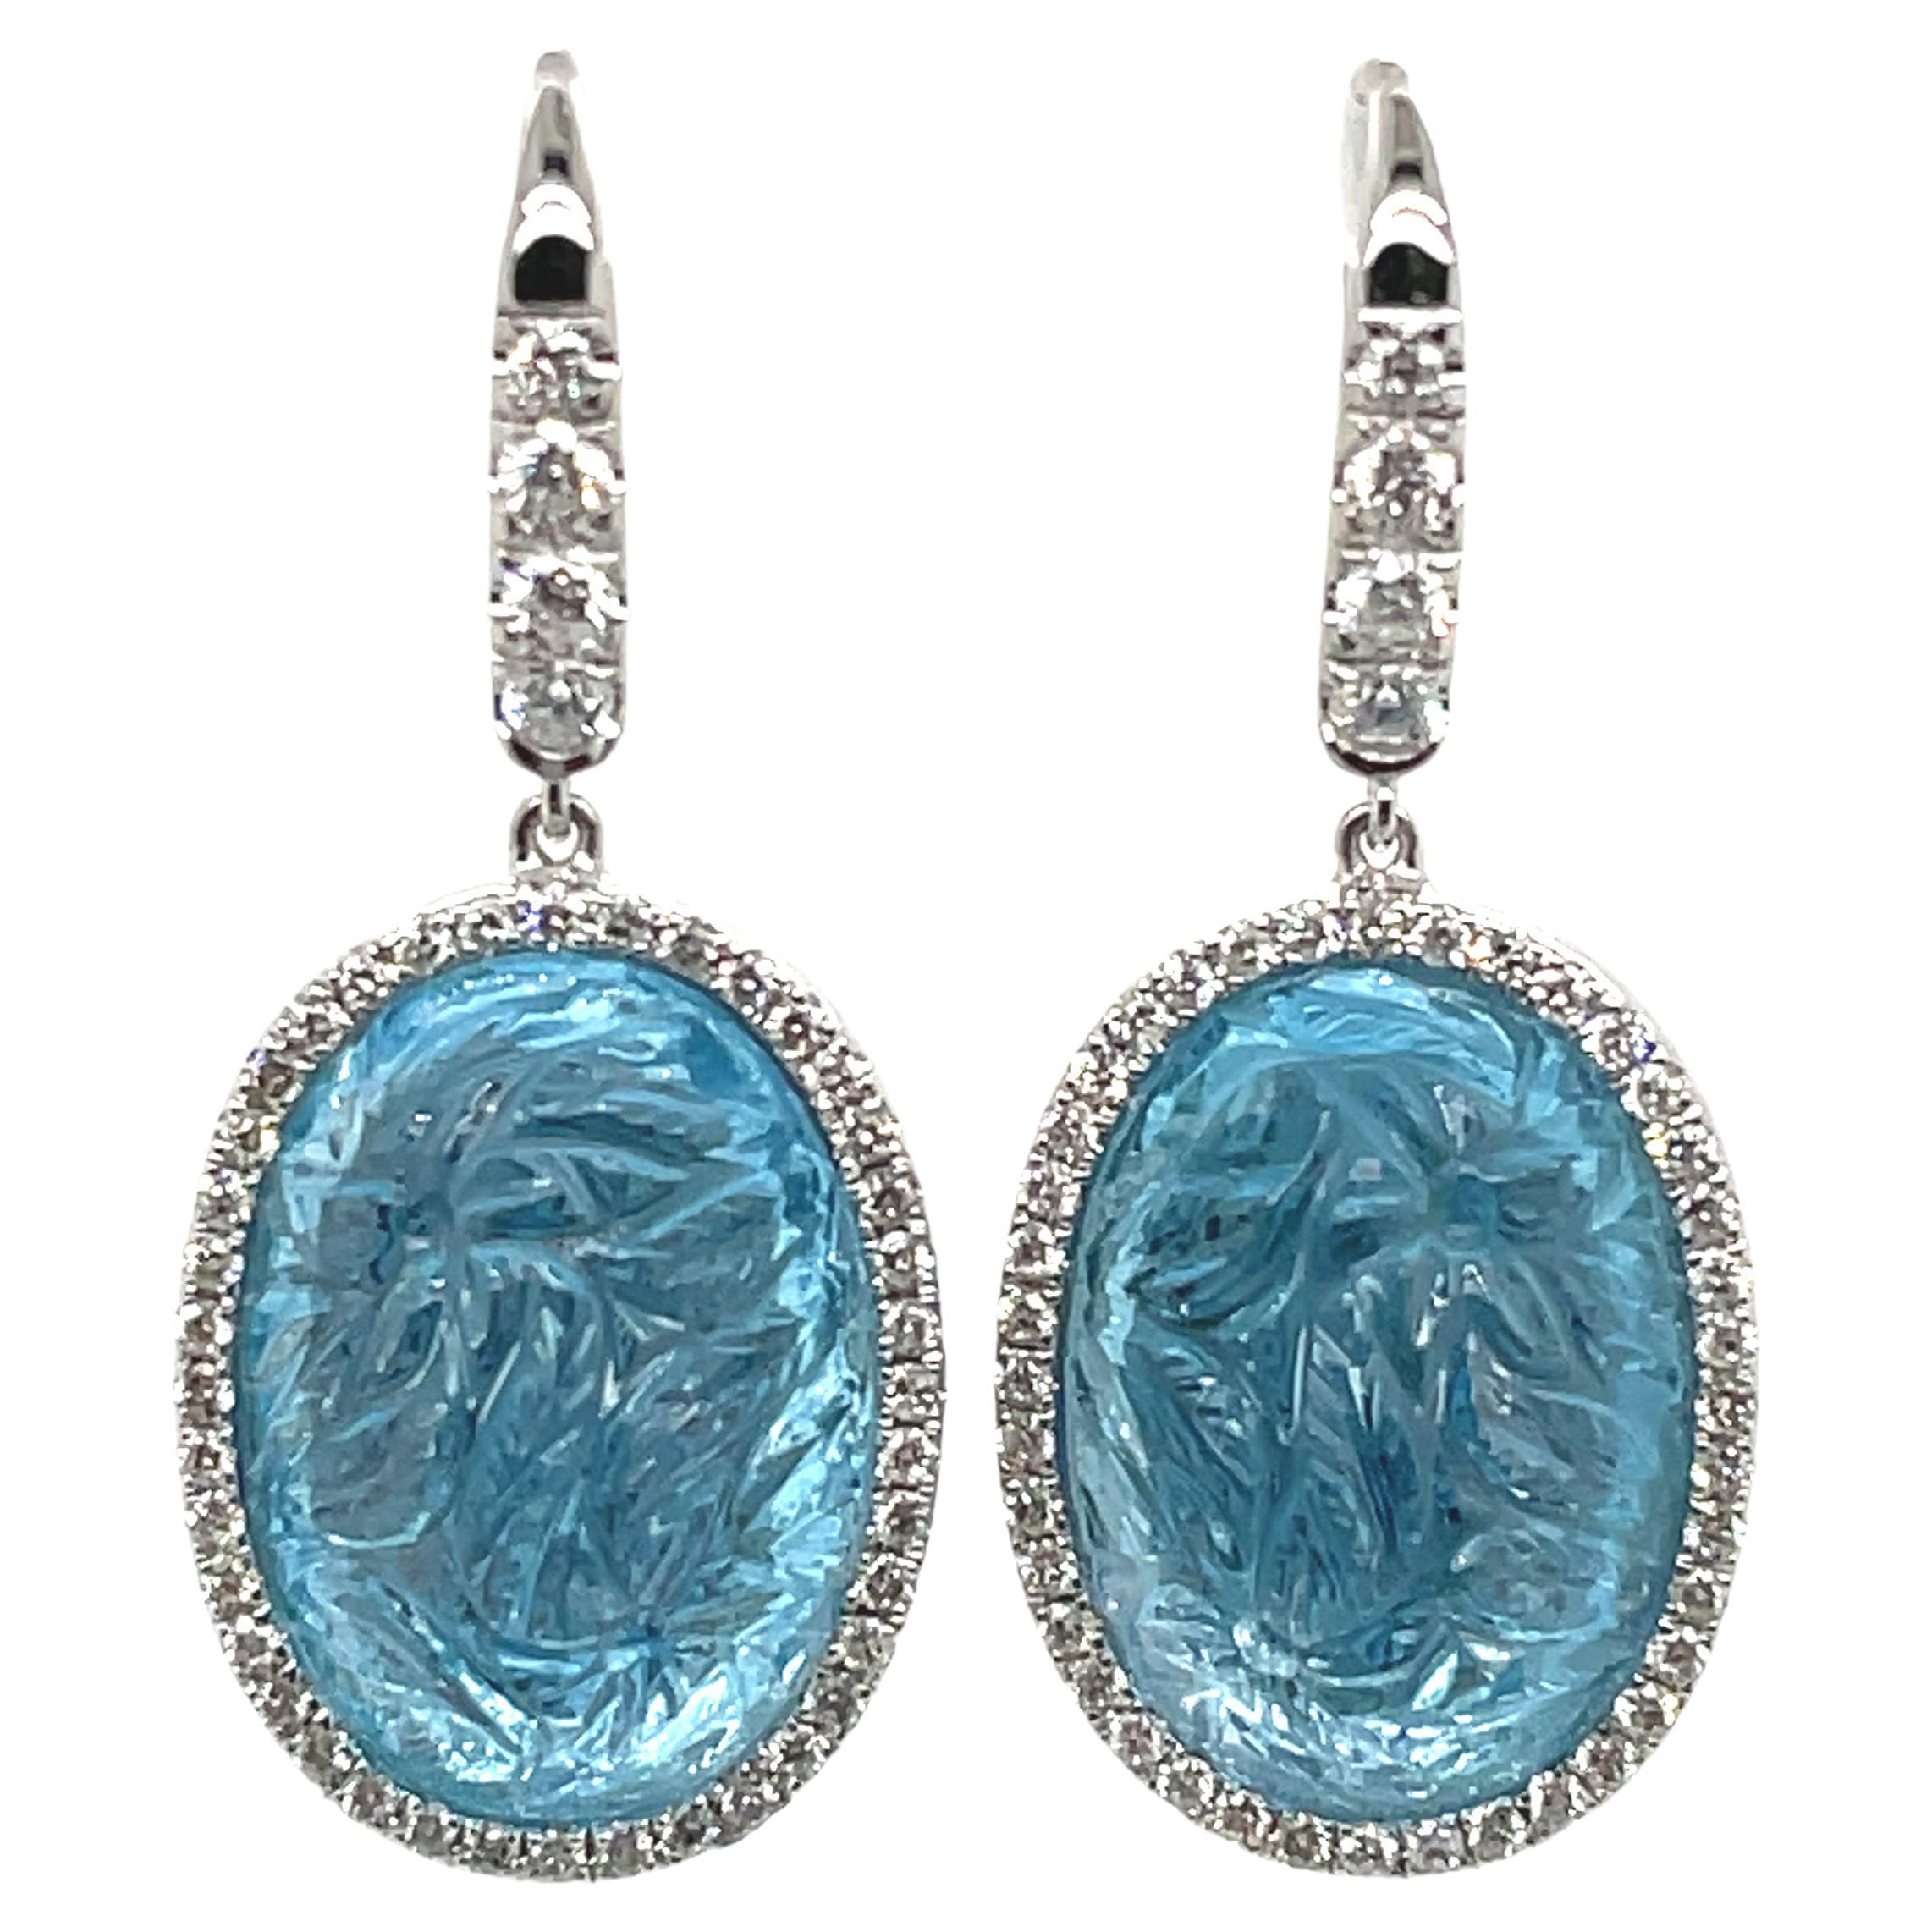 Carved Blue Topaz Cts 27.41 and Diamond Earrings Set in 18k White Gold For Sale